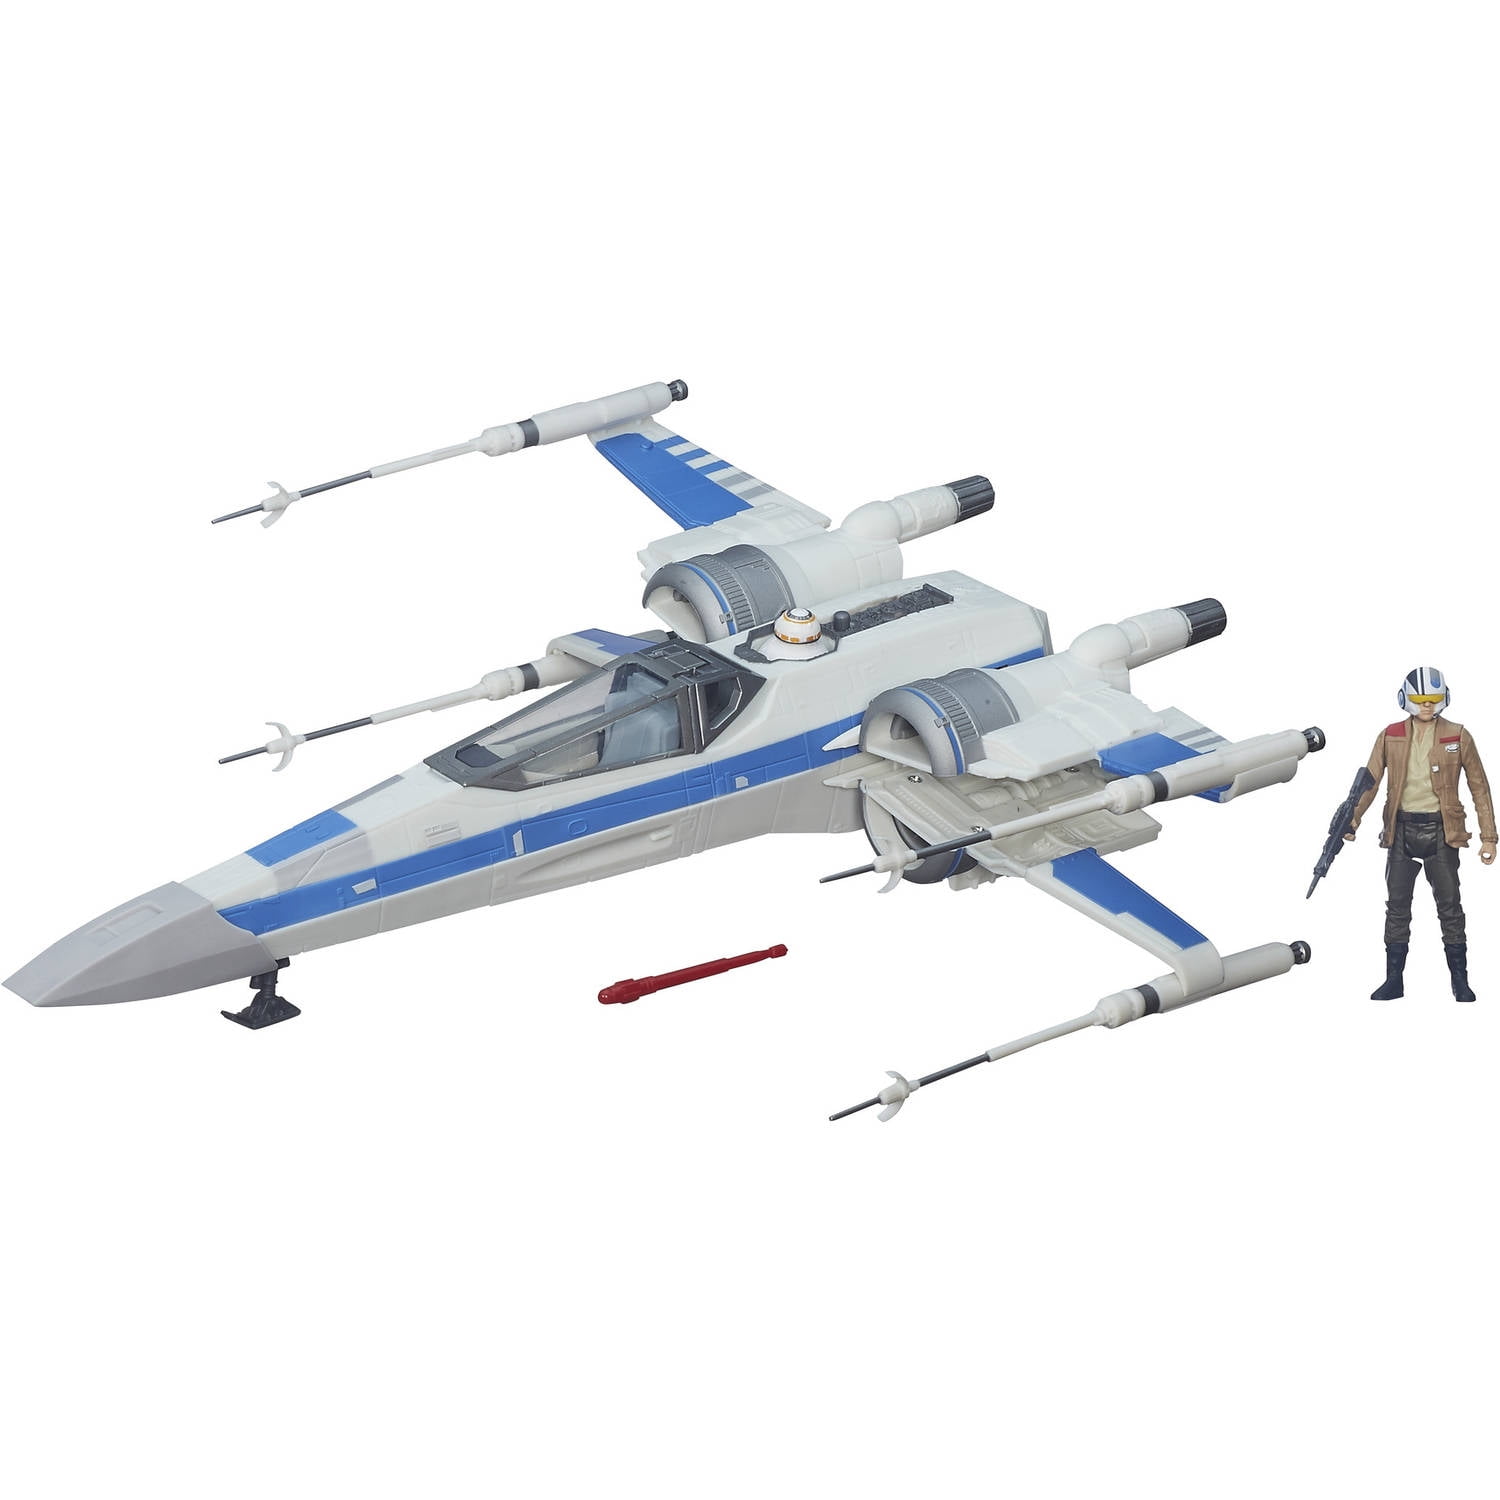 Acrylic display stand for Hasbro Star Wars Force Awakens X-wing fighter T-70